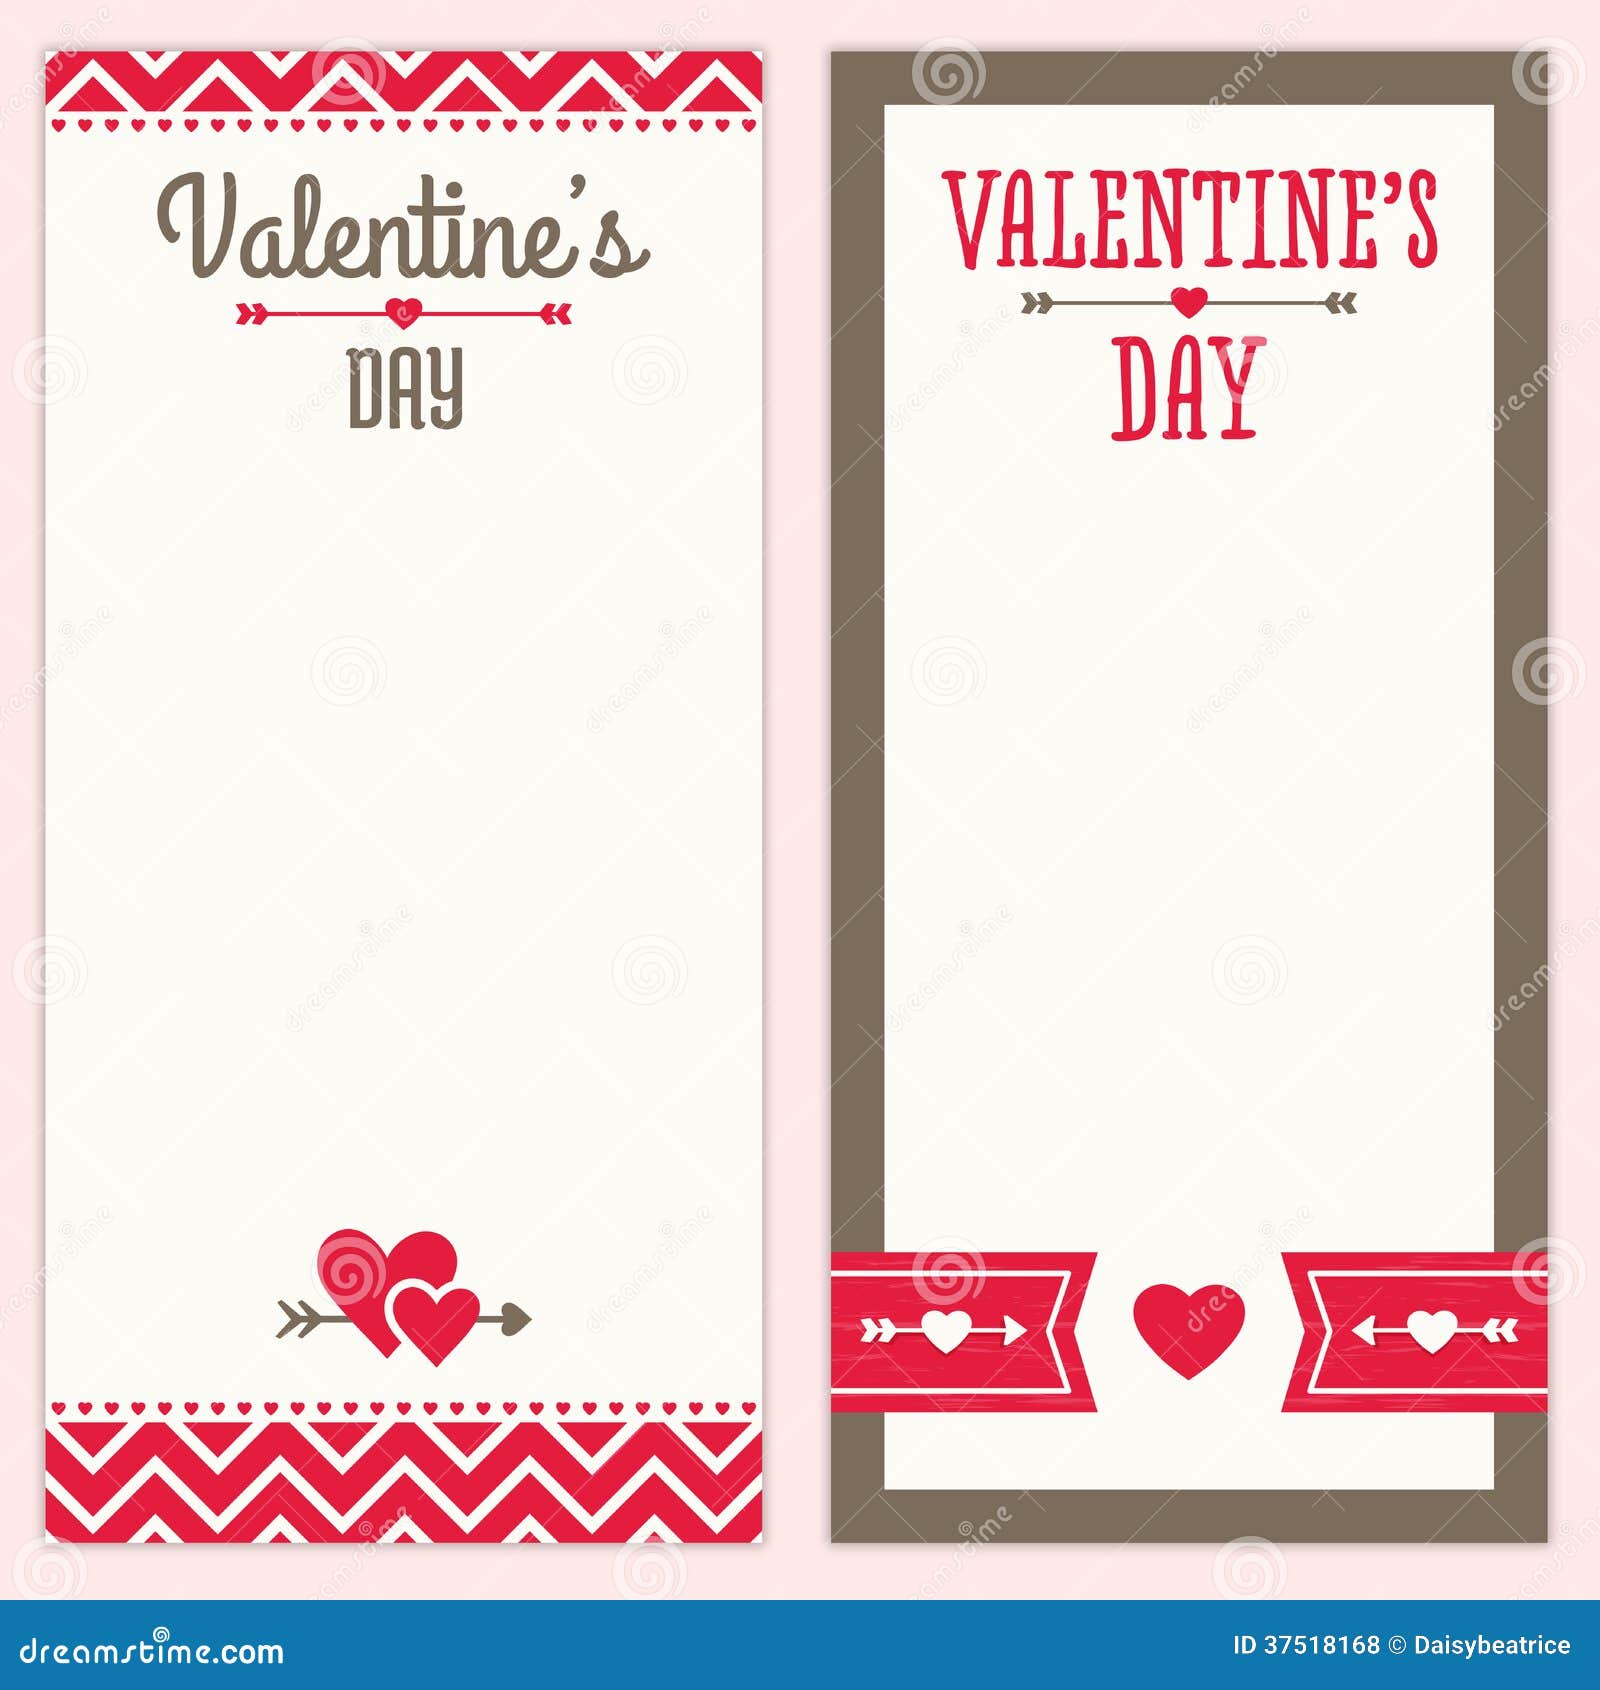 Valentines Day Menu or Invitation Designs in Red a Stock Vector With Regard To Valentine Menu Templates Free